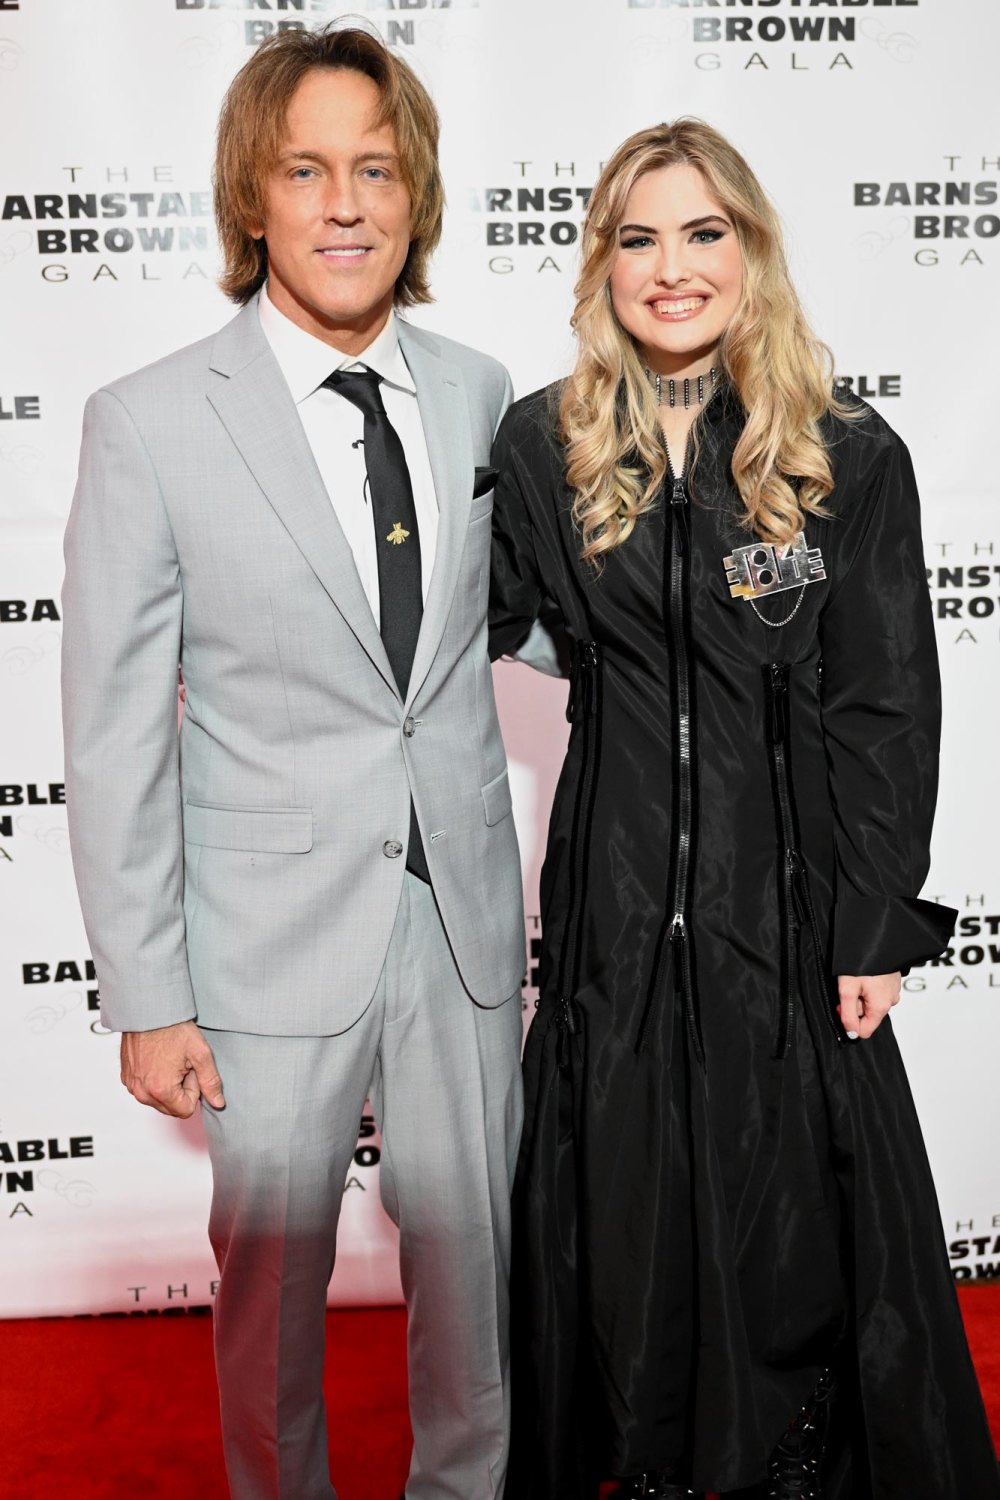 Anna Nicole Smiths Daughter Dannielynn Is All Grown Up at Kentucky Derby With Dad Larry Birkhead